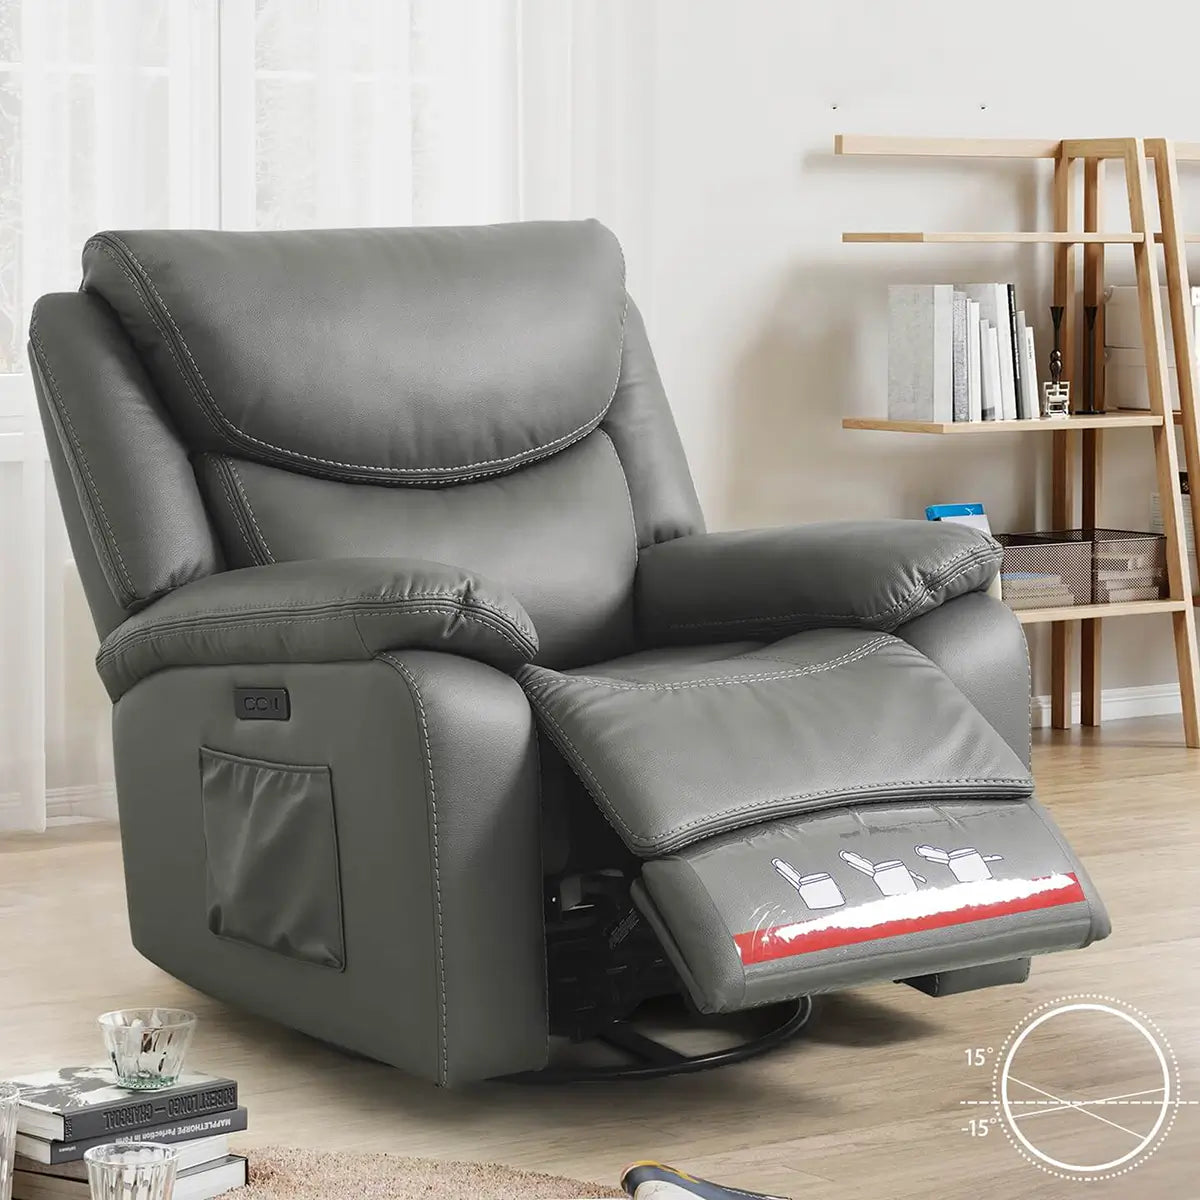 Soulout_Swivel_Rocking_Recliner_Chair